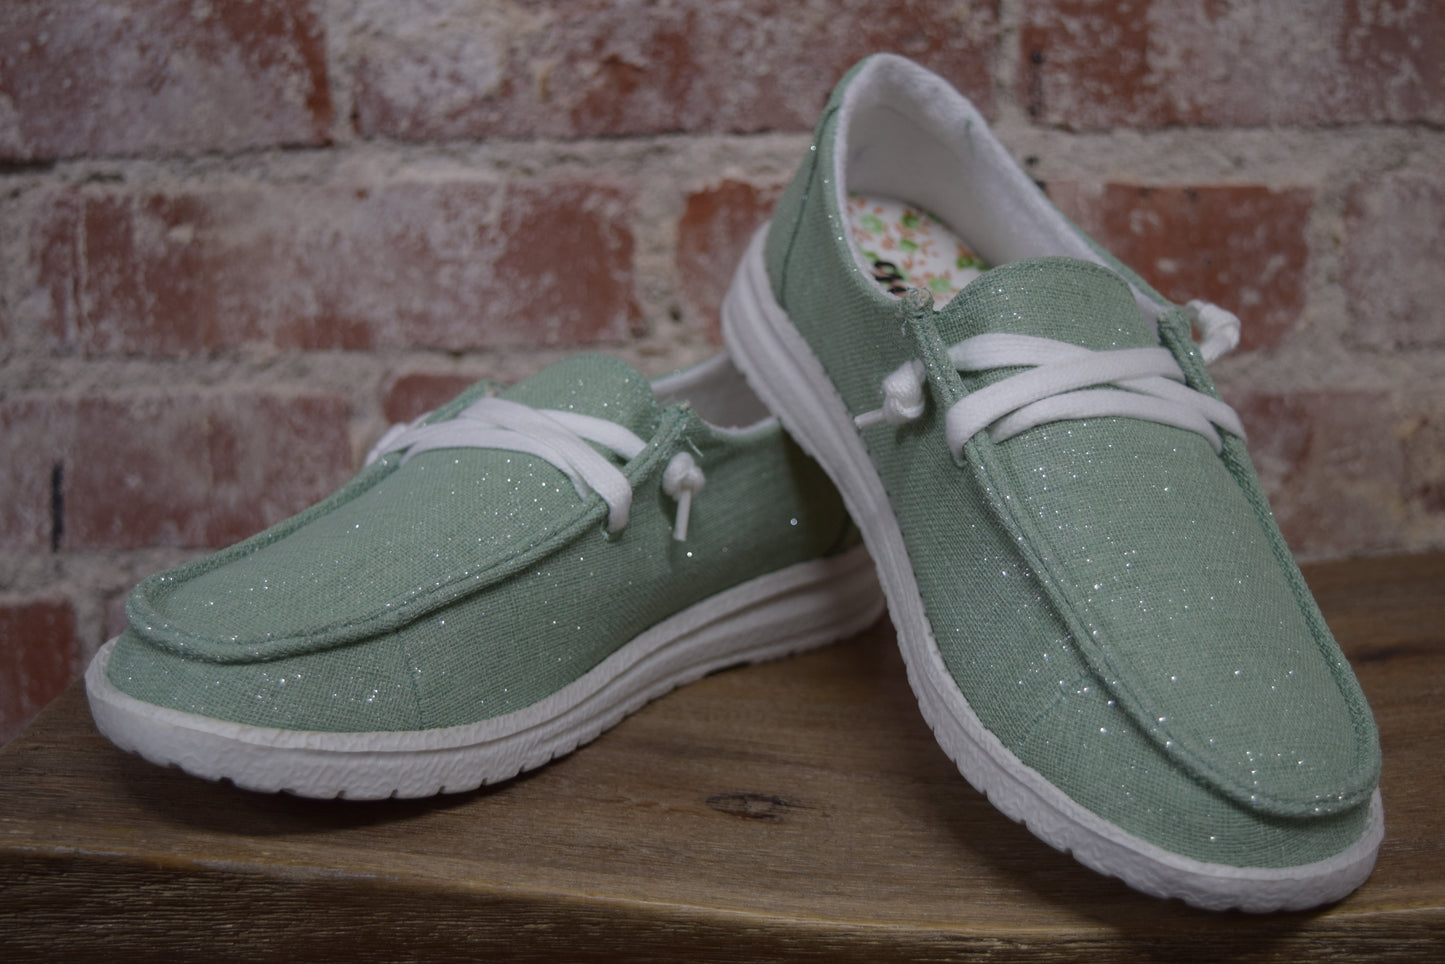 The Holly Shine Mint Shoes